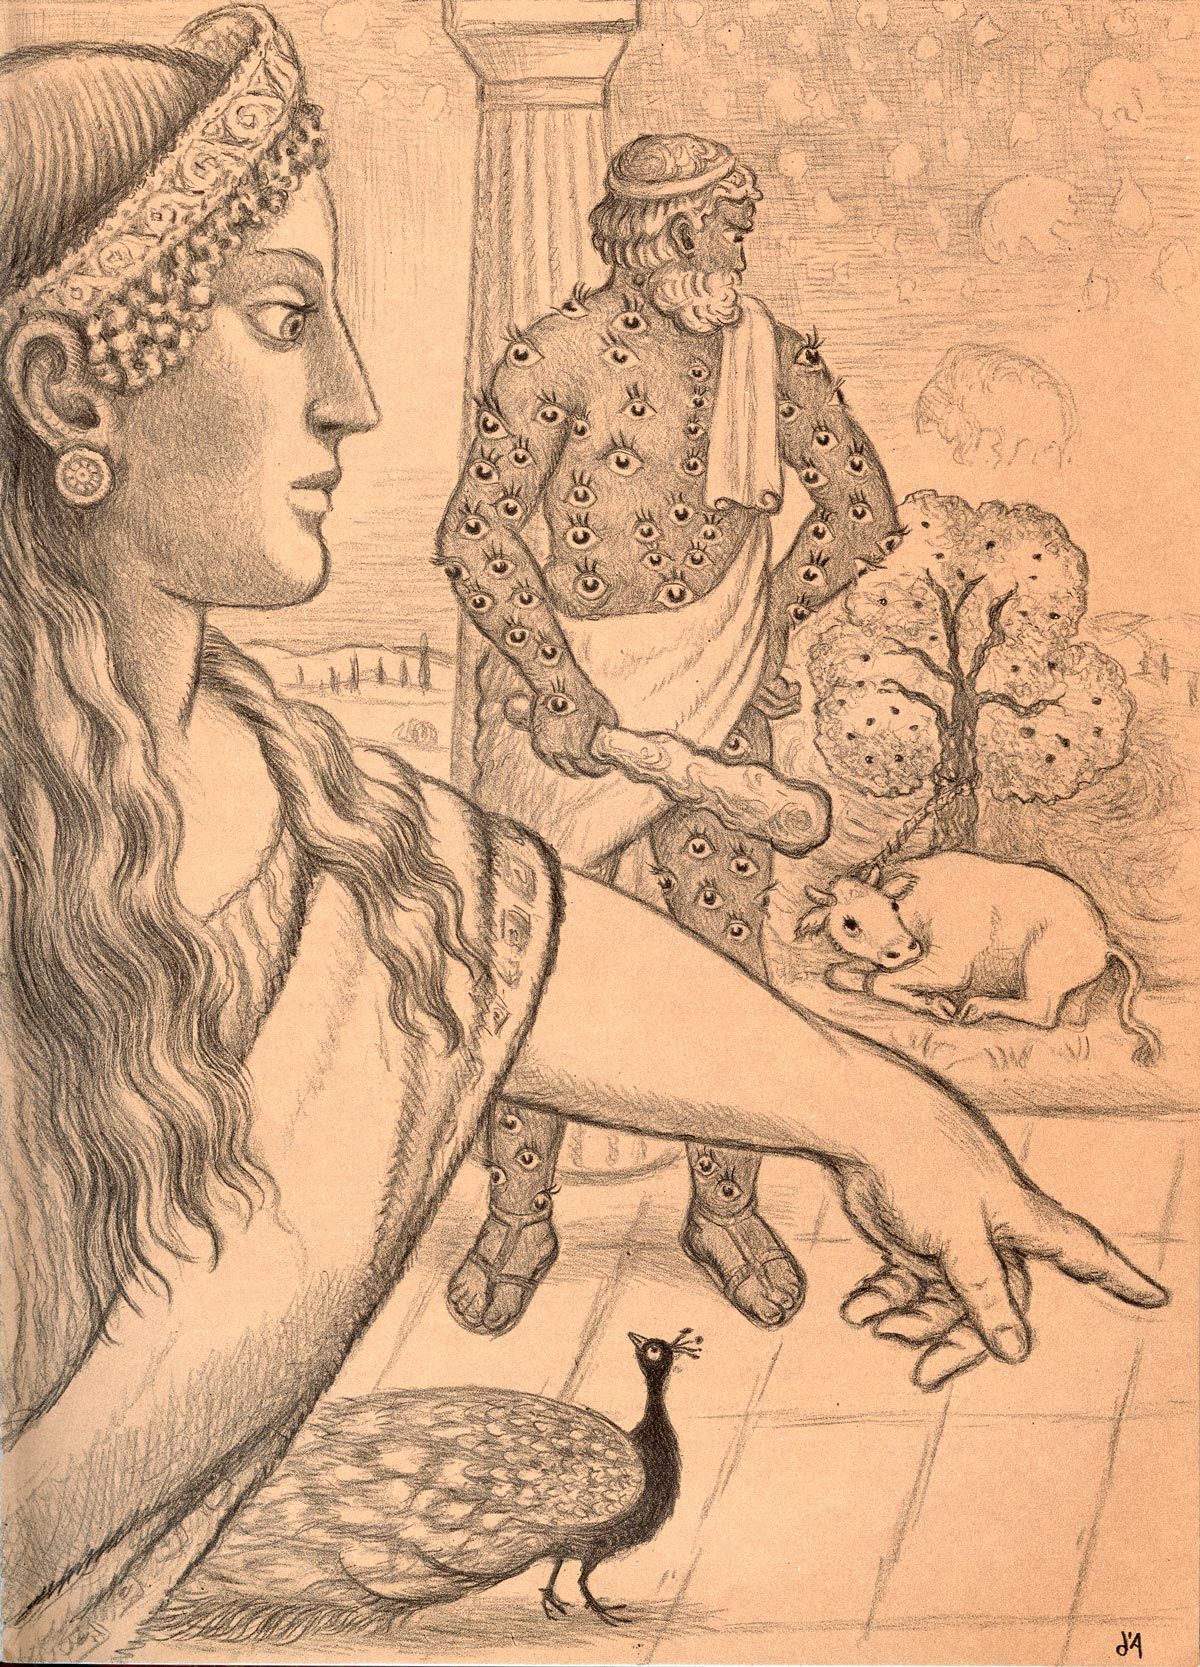 An illustration from the book, Hera pointing toward Argus, white cow Io in the background.